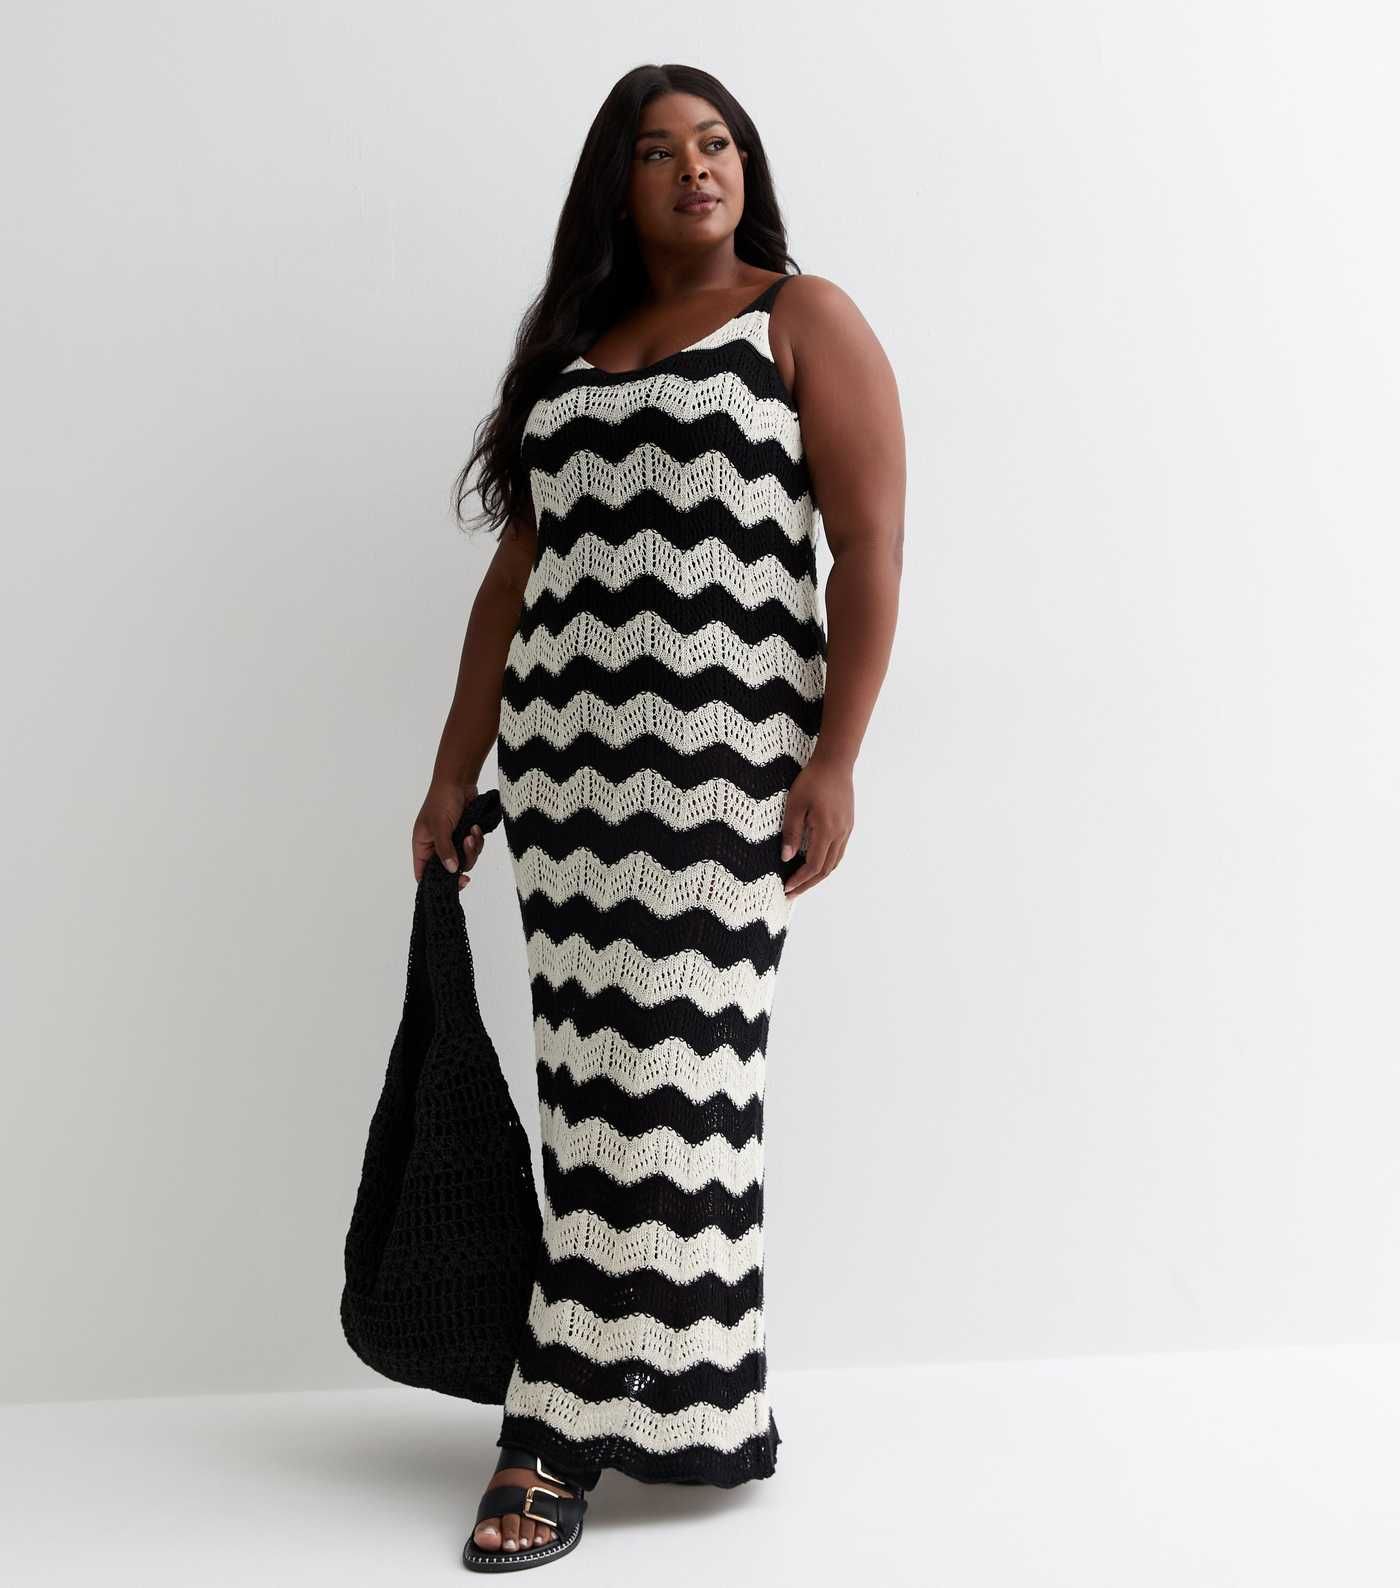 Curves Black Chevron Crochet Beach Maxi Dress
						
						Add to Saved Items
						Remove from S... | New Look (UK)